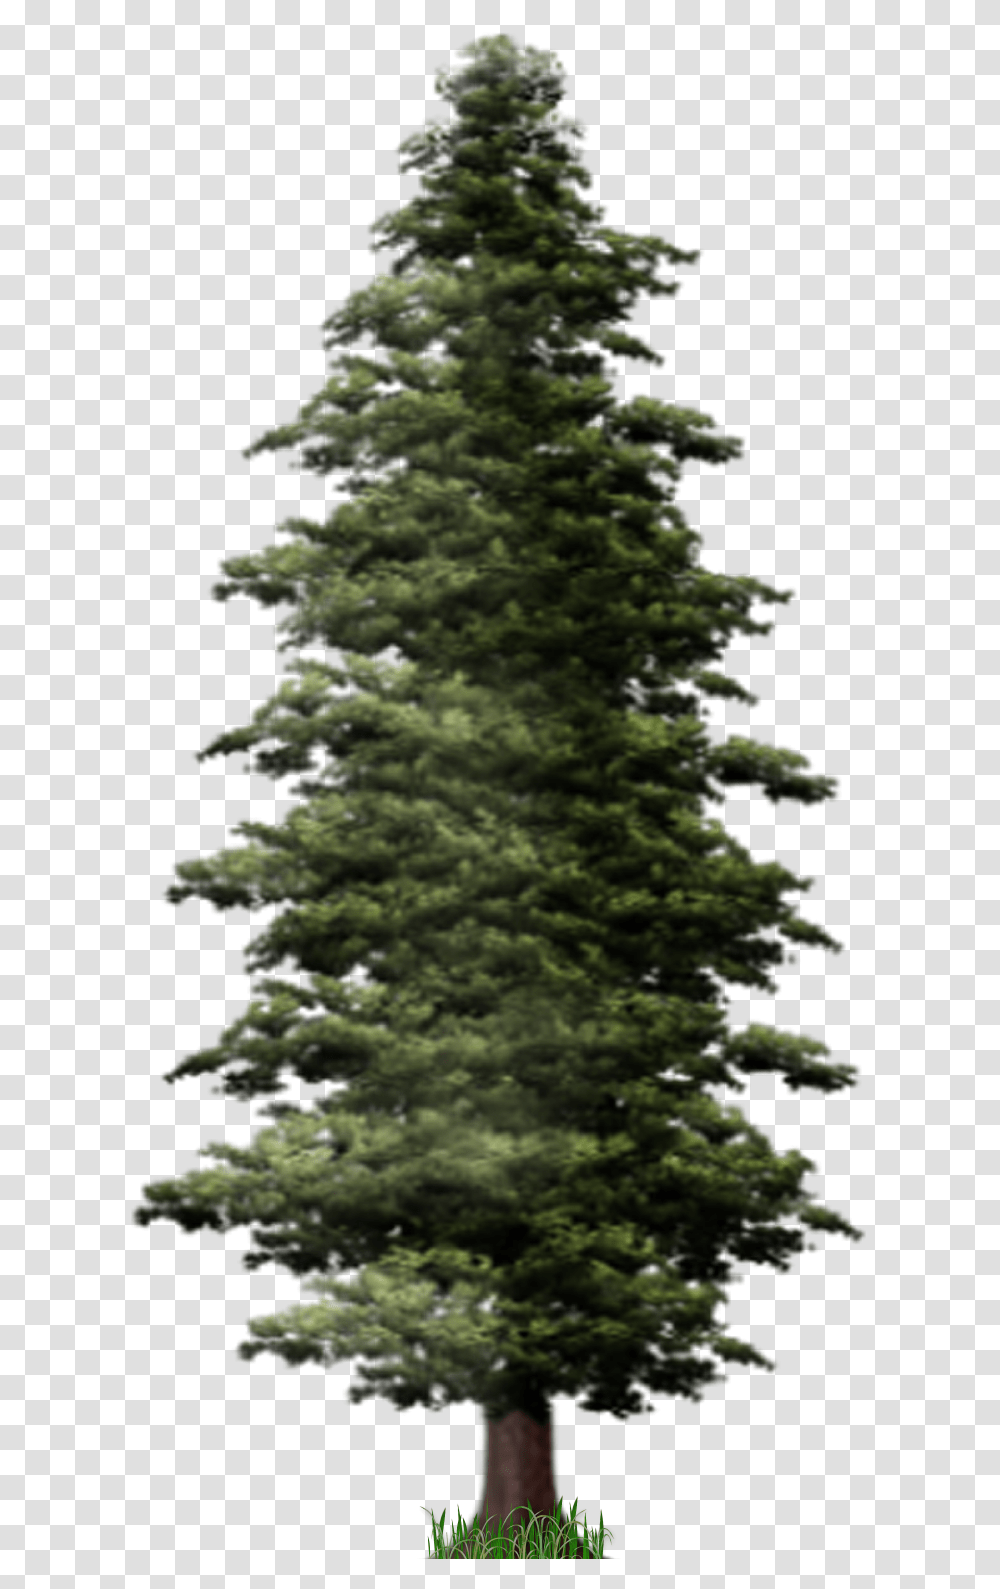 Download Pine Tree File For Designing Projects Pine Tree Fir, Plant, Abies, Christmas Tree, Ornament Transparent Png